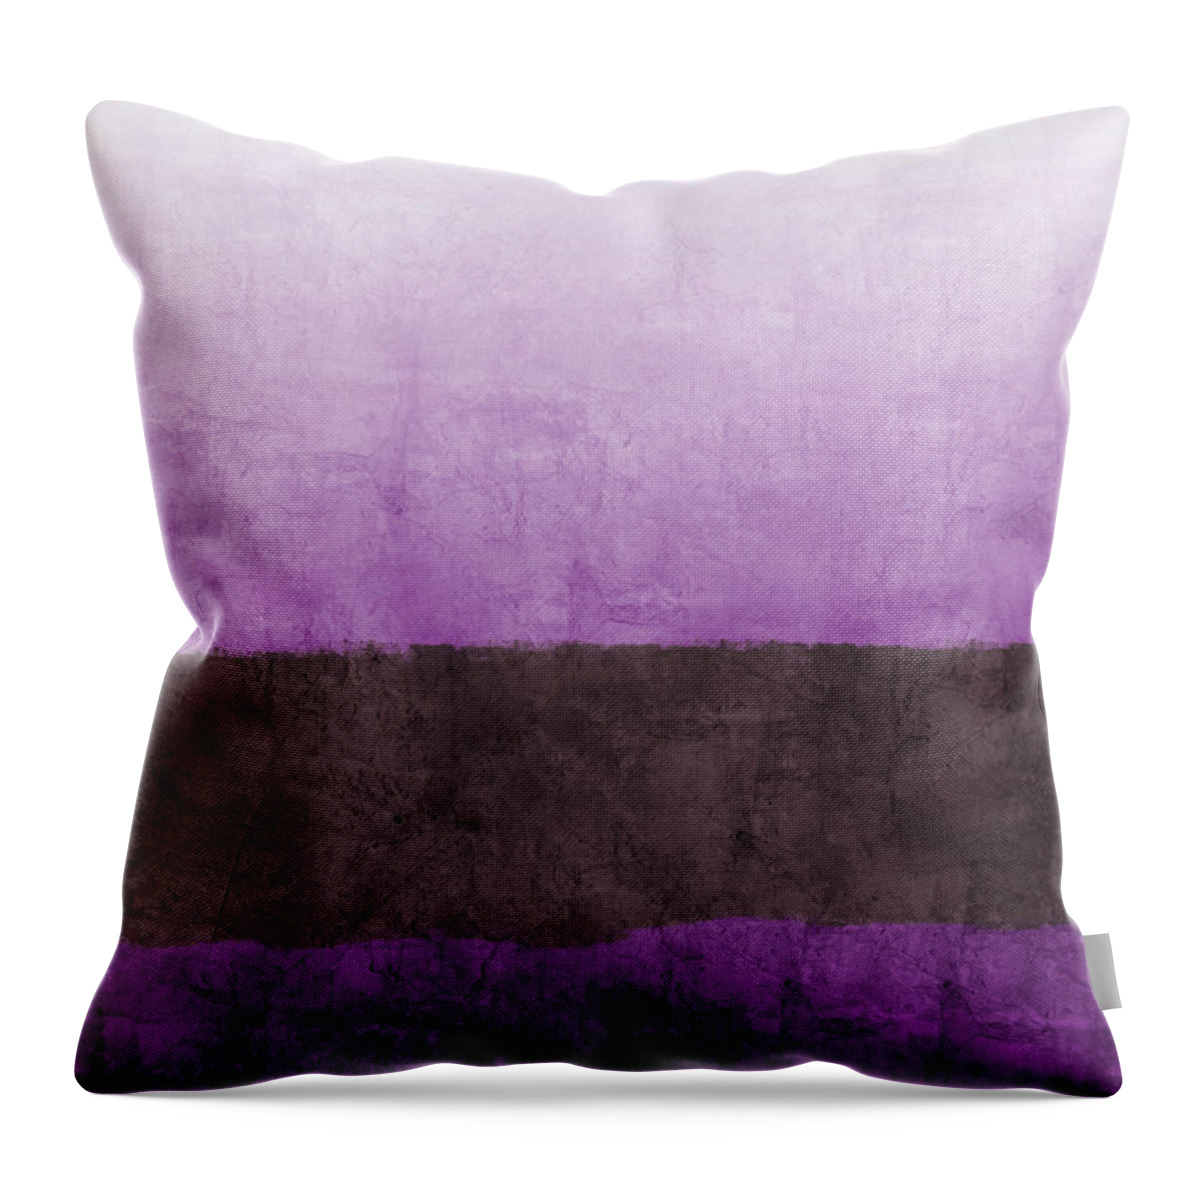 Abstract Landscape Throw Pillow featuring the painting Purple On The Horizon- Art by Linda Woods by Linda Woods